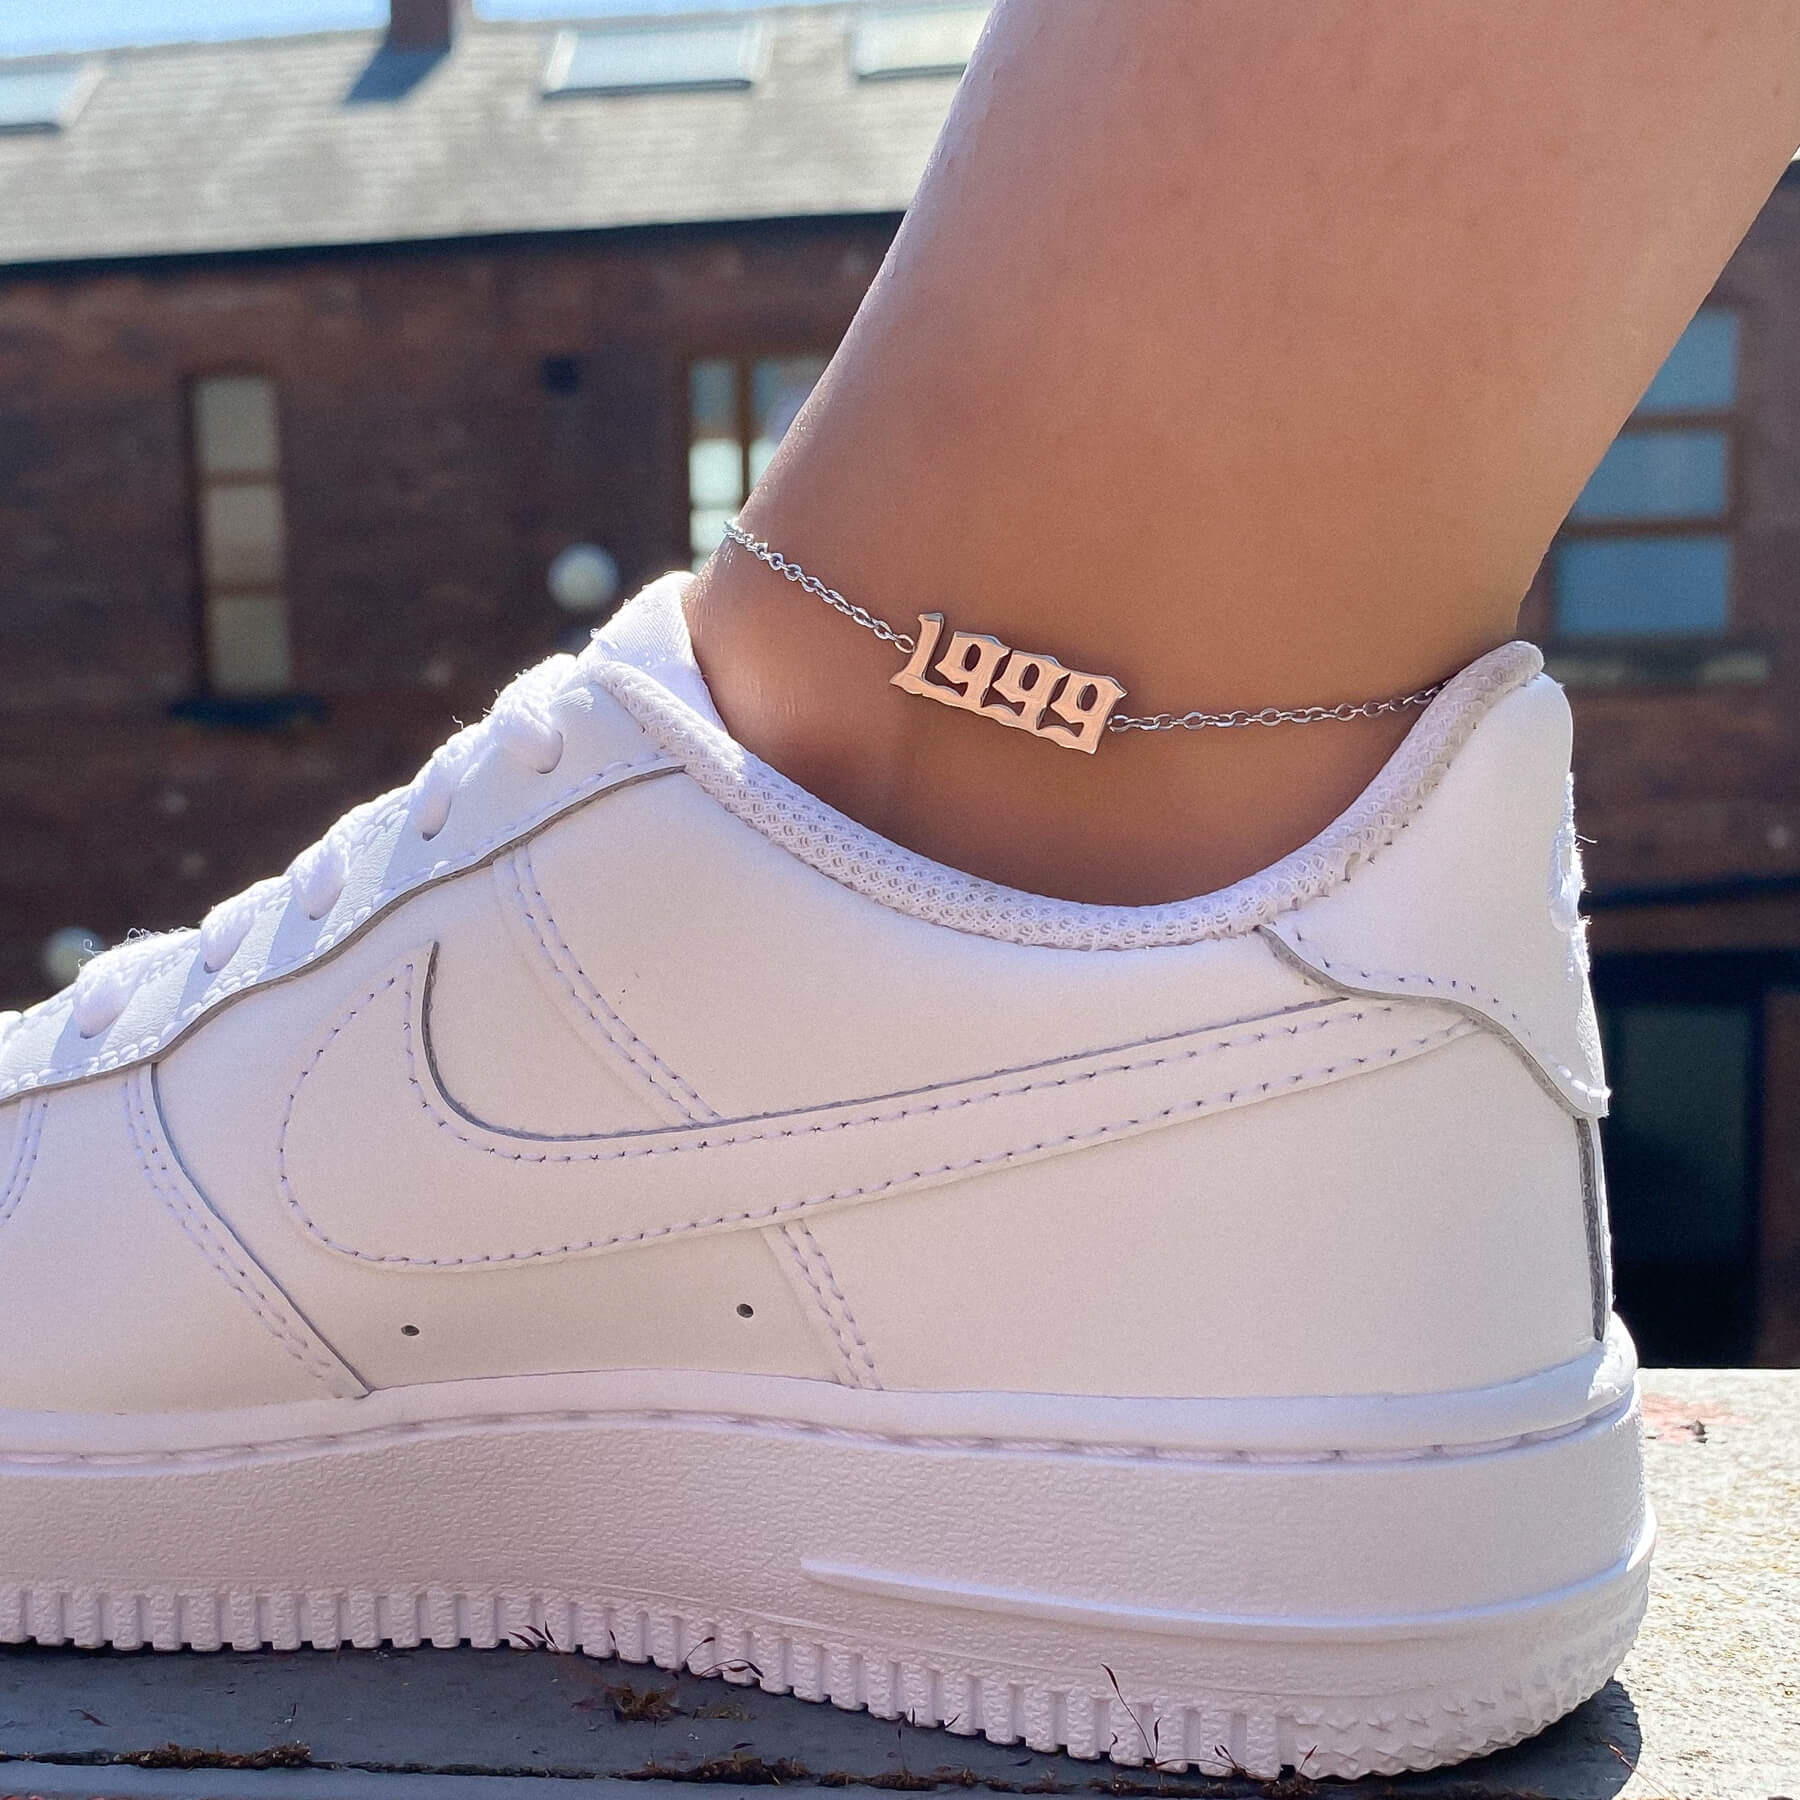 A sunny shot of a silver birth year anklet while wearing white nike sneakers.